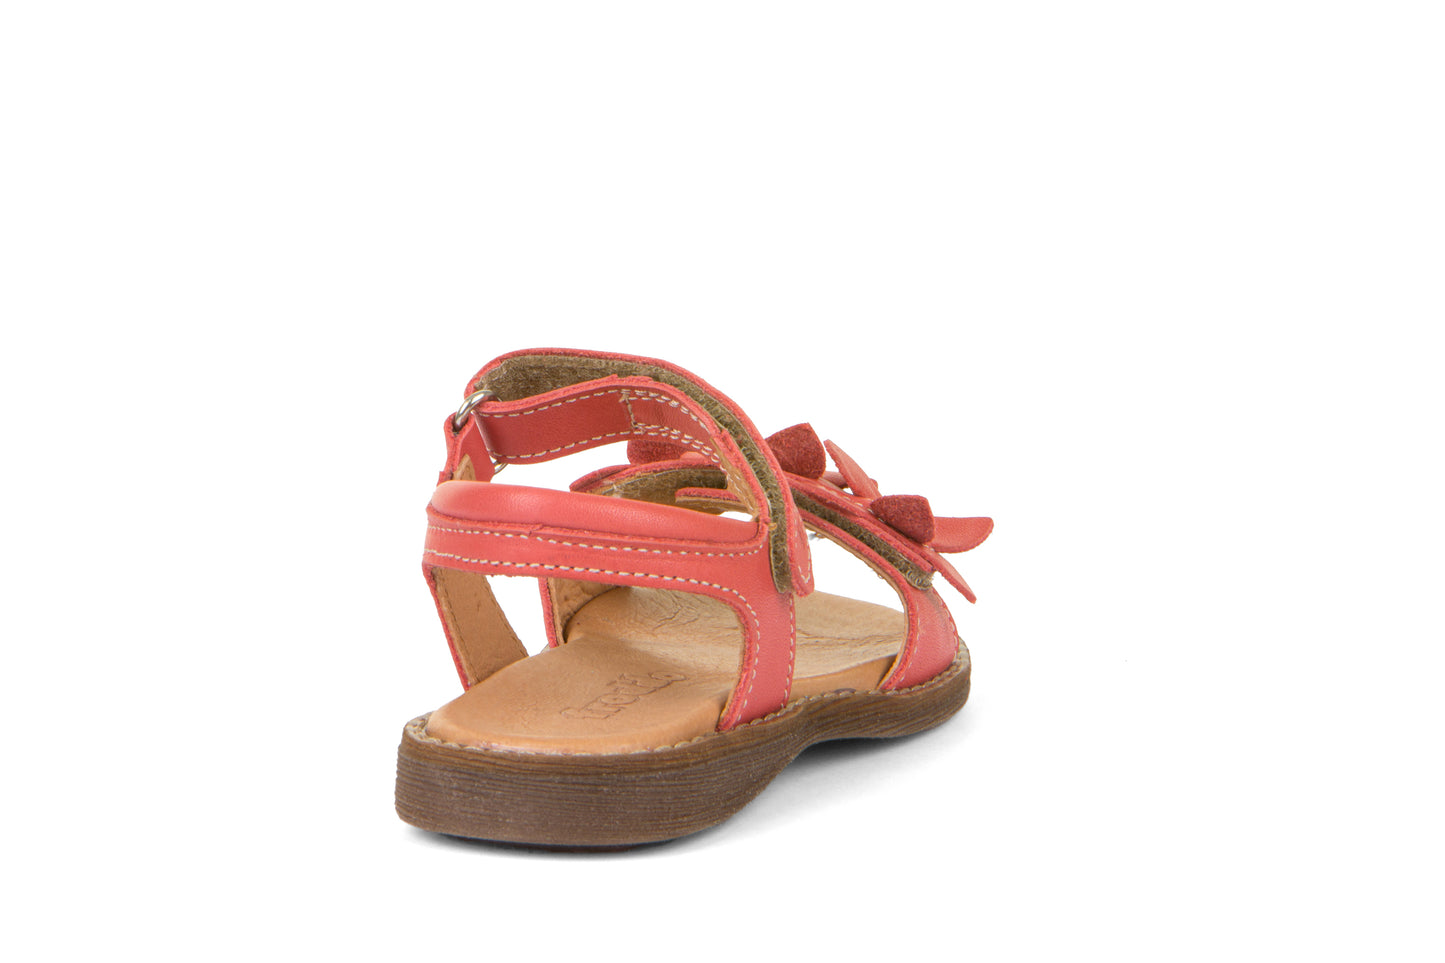 A girls sandal by Froddo, style G3150228-9 Lore Flowers, in coral with flowers detail, velcro fastening. Back view.